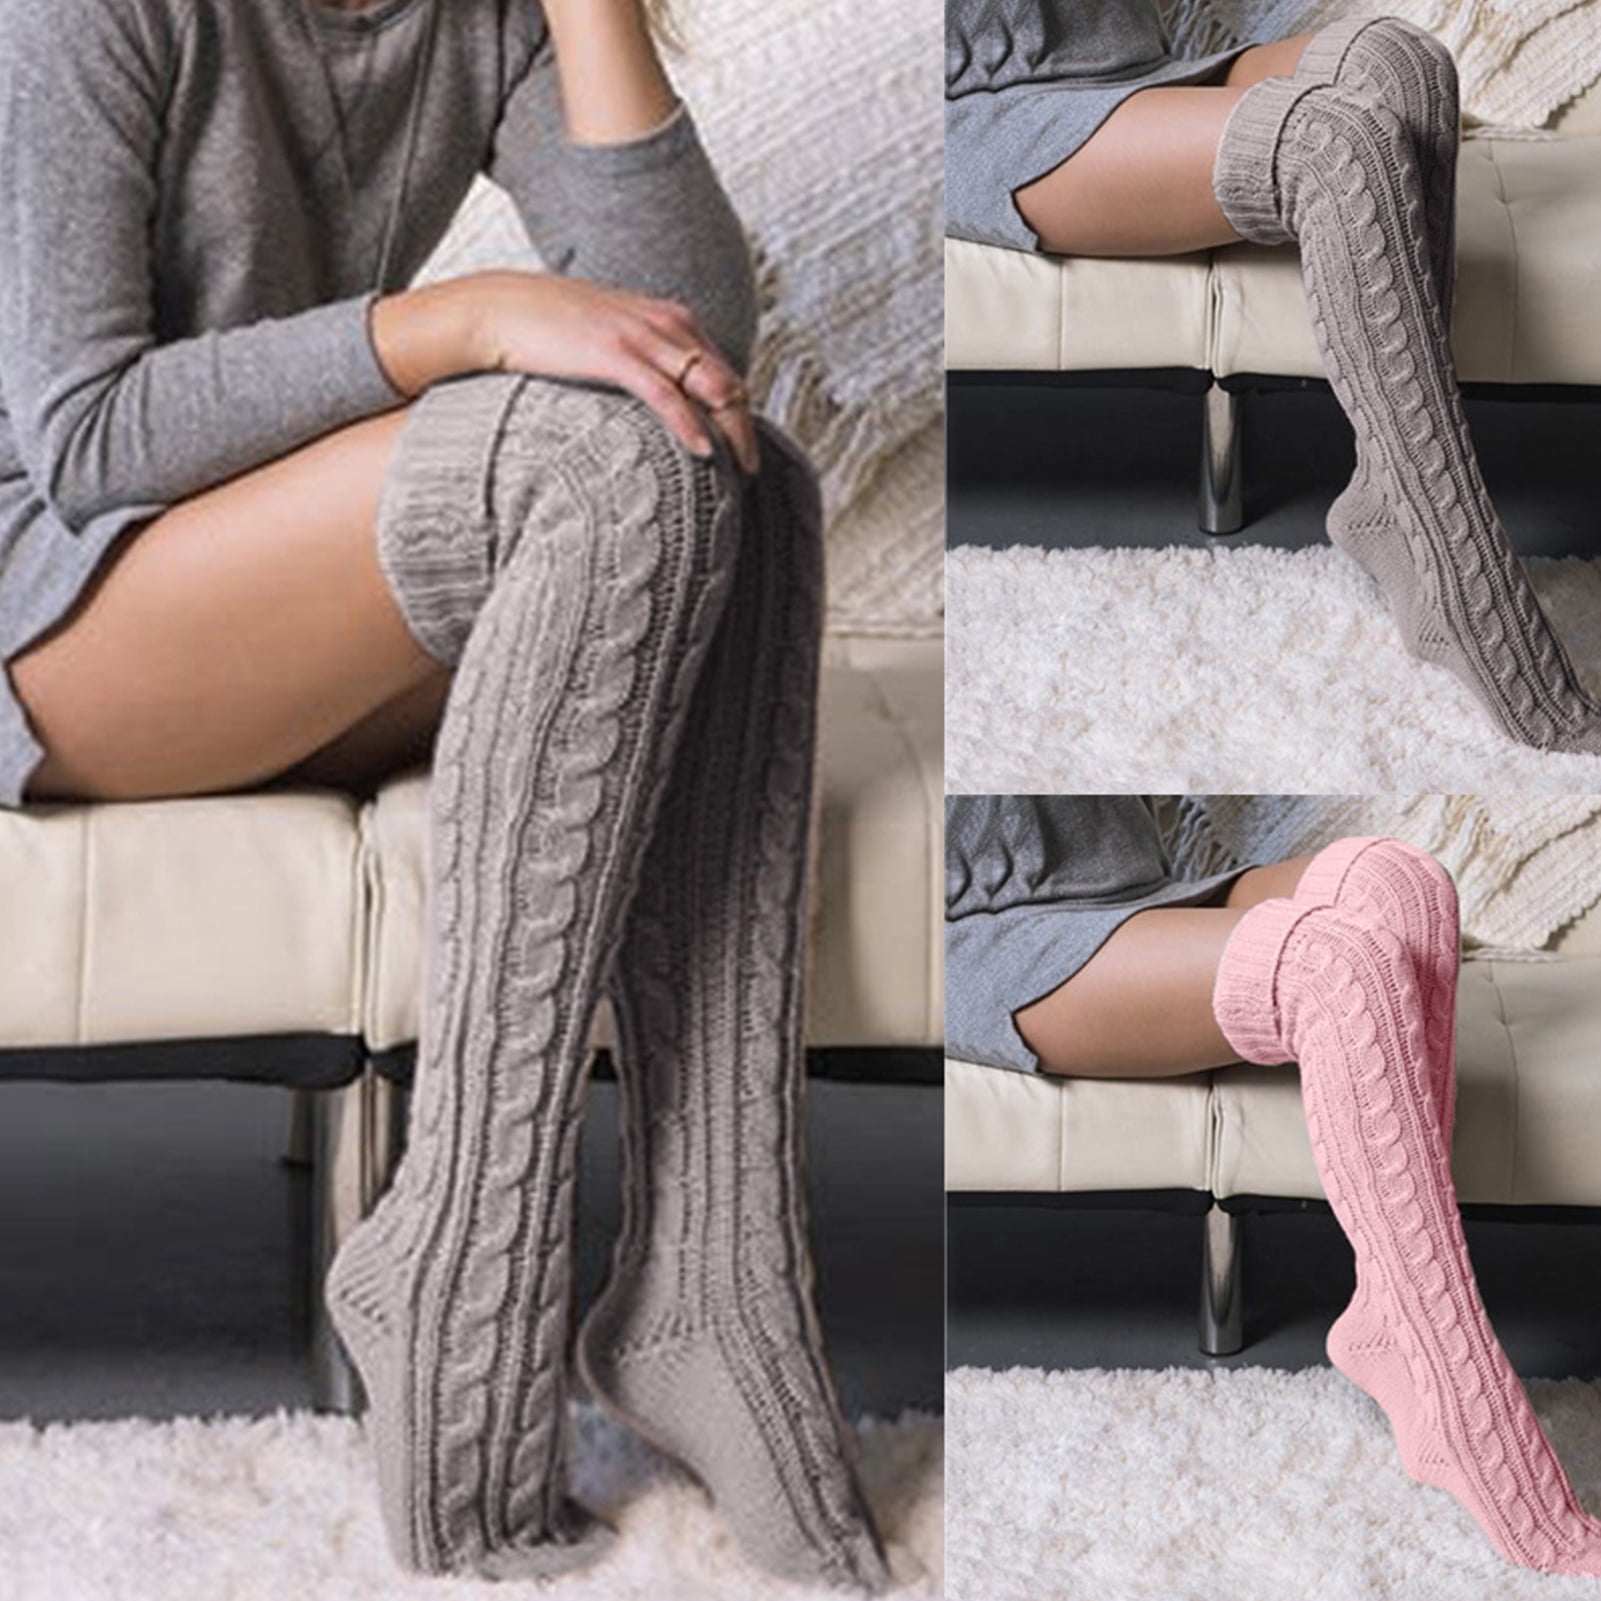 Braid Winter Stockings Over Knee Warm Thigh-Highs Knitted Hose Stockings 